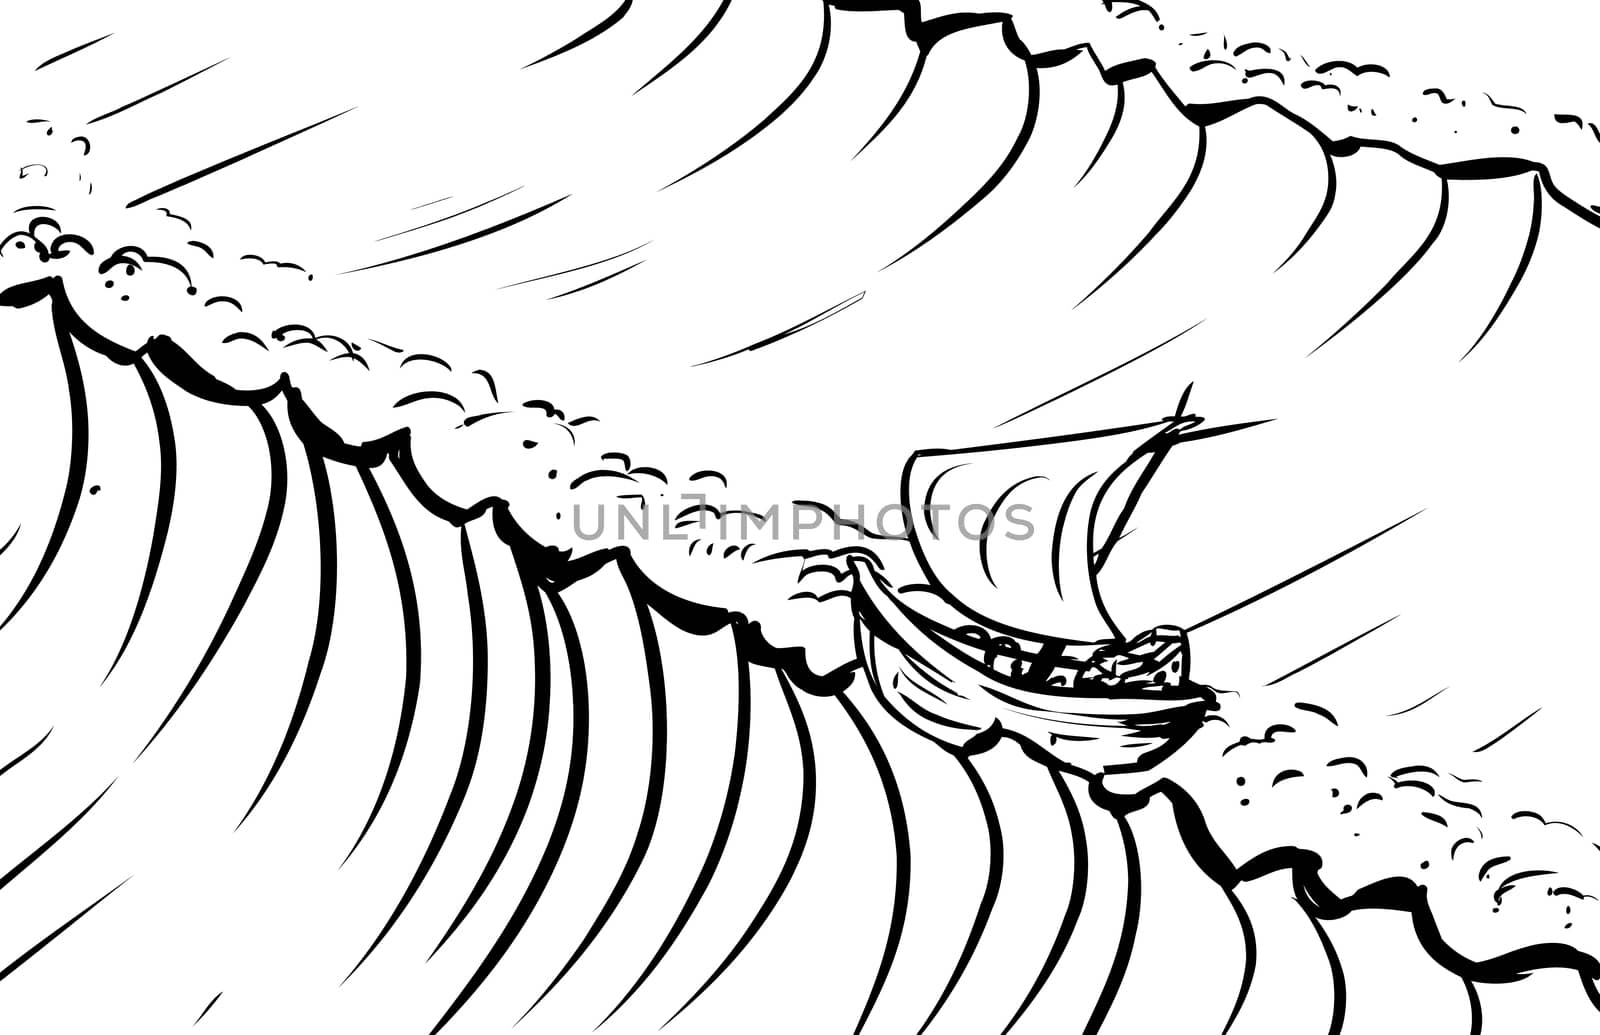 Outlined ship and tidal waves by TheBlackRhino